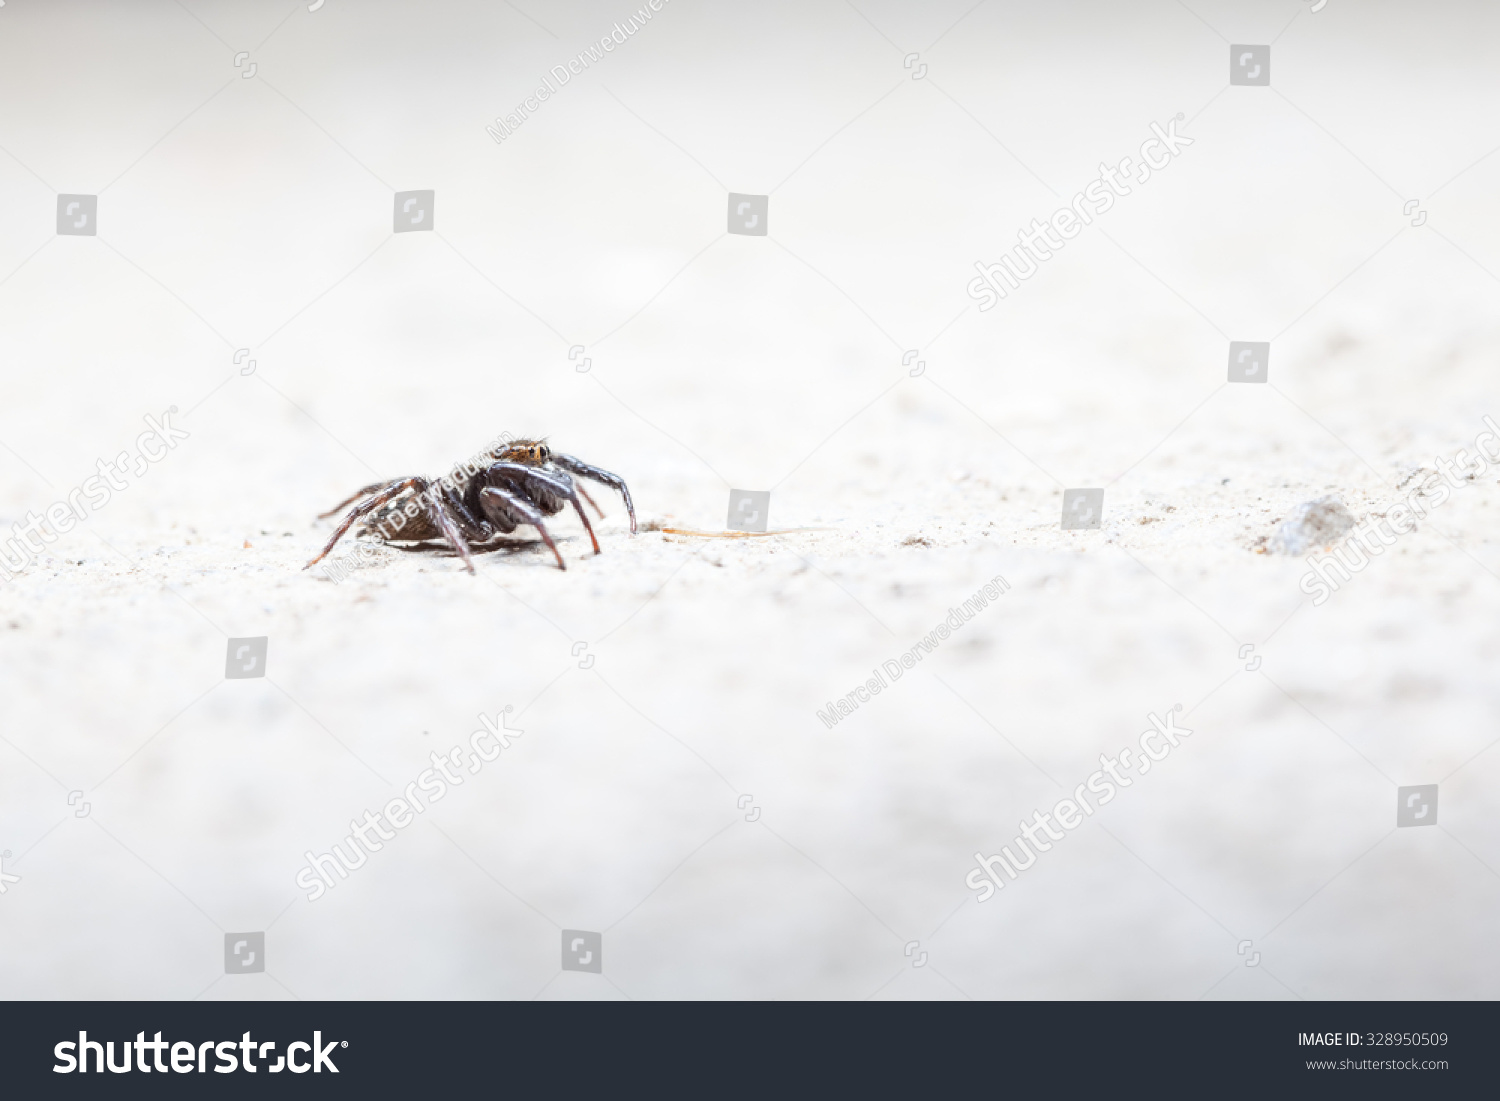 on the concrete floor there is a Jumping spider #328950509